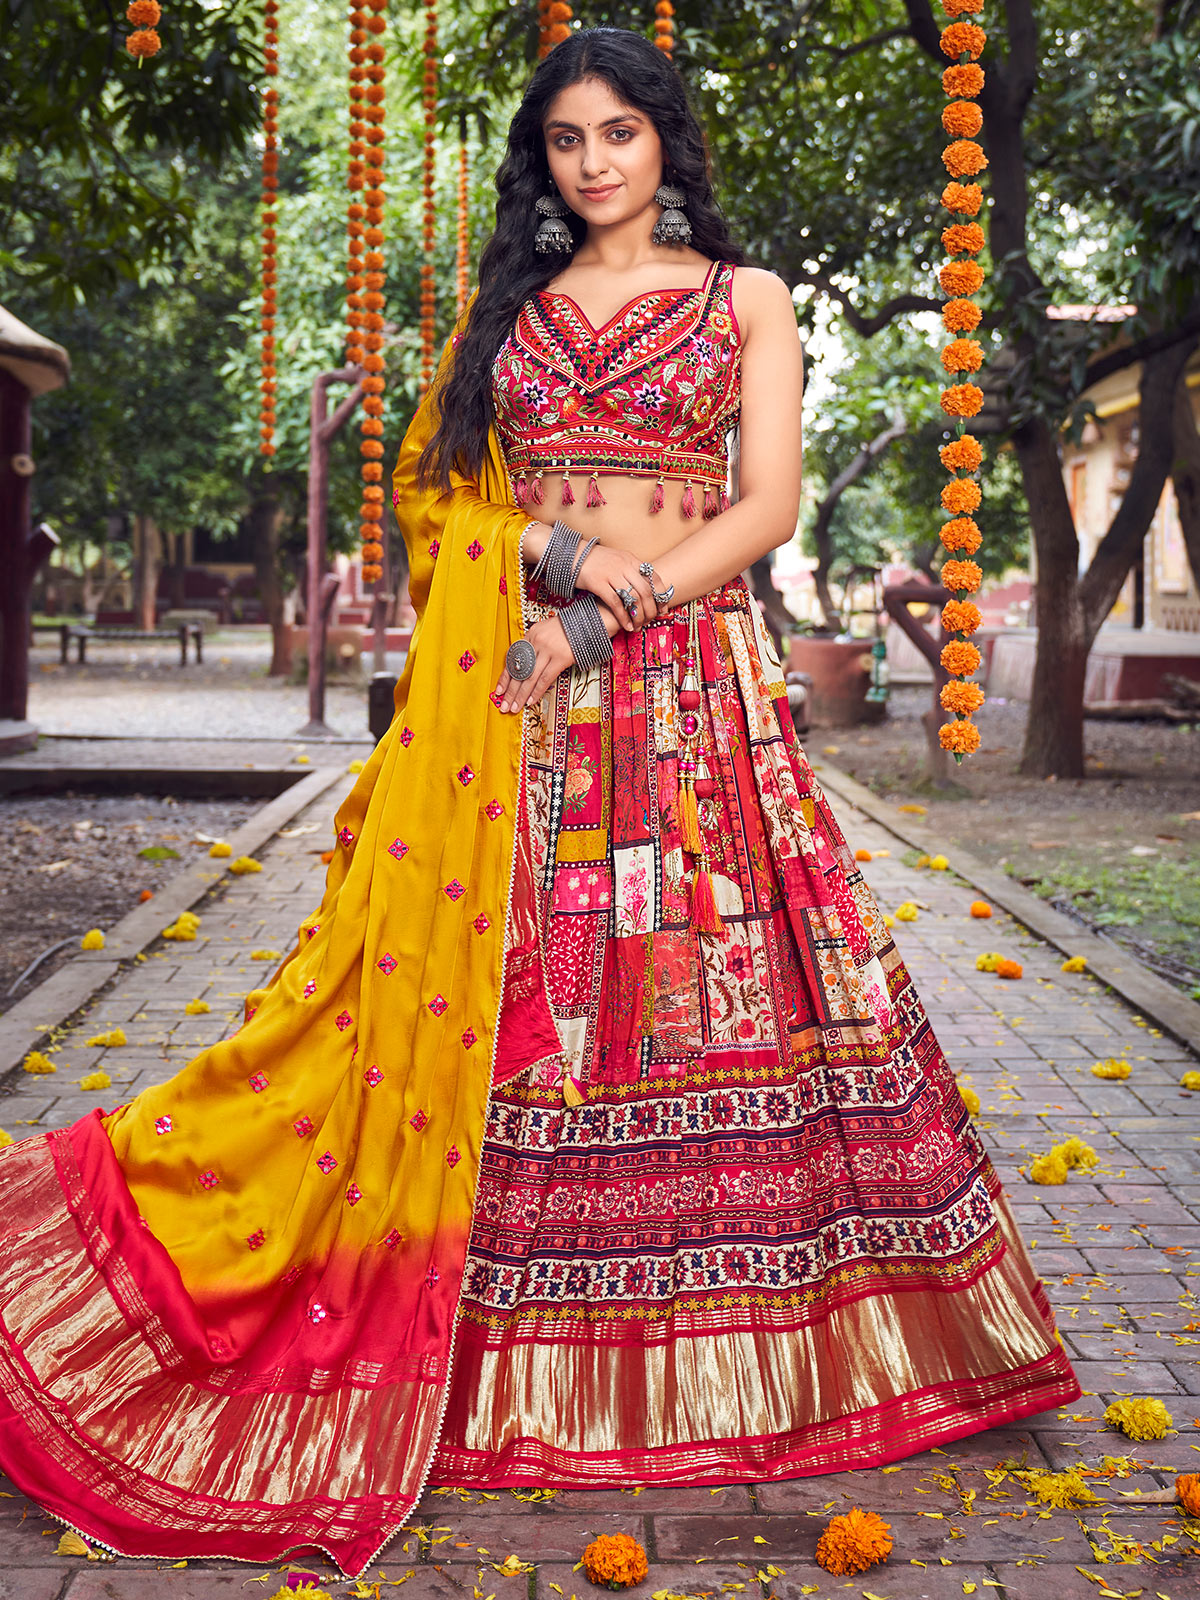 India's bridal shopping season is here. How can luxury brands tap in? |  Vogue Business